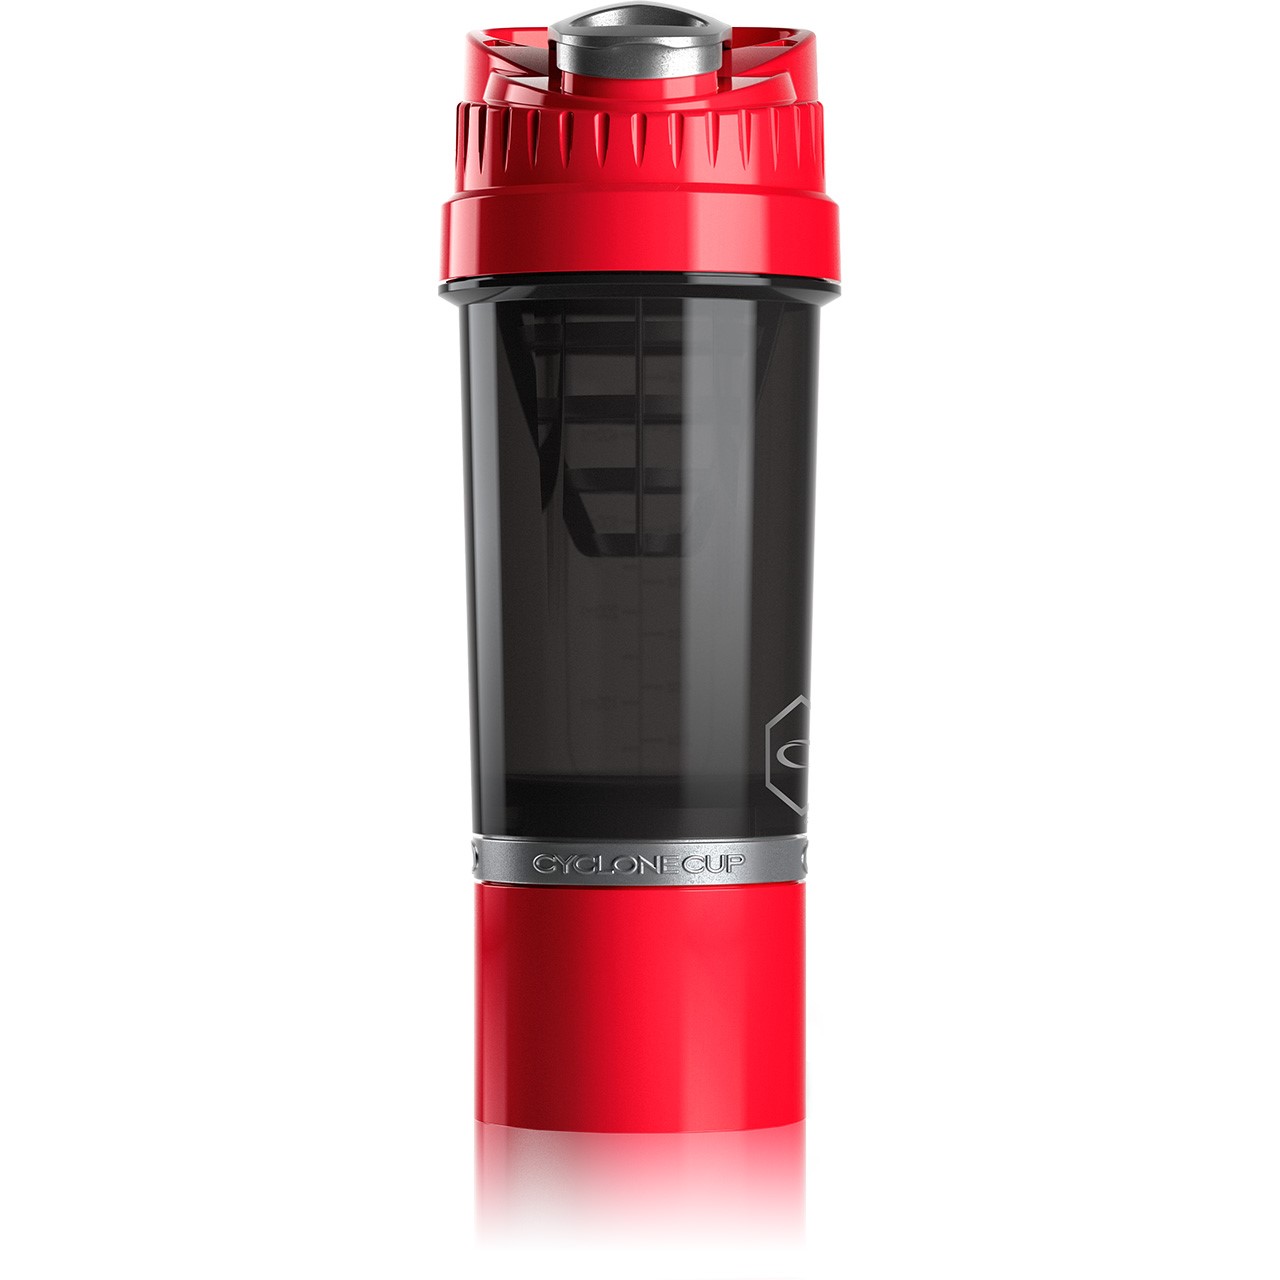 New Protein Shaker Cyclone Cup Red 650 ml